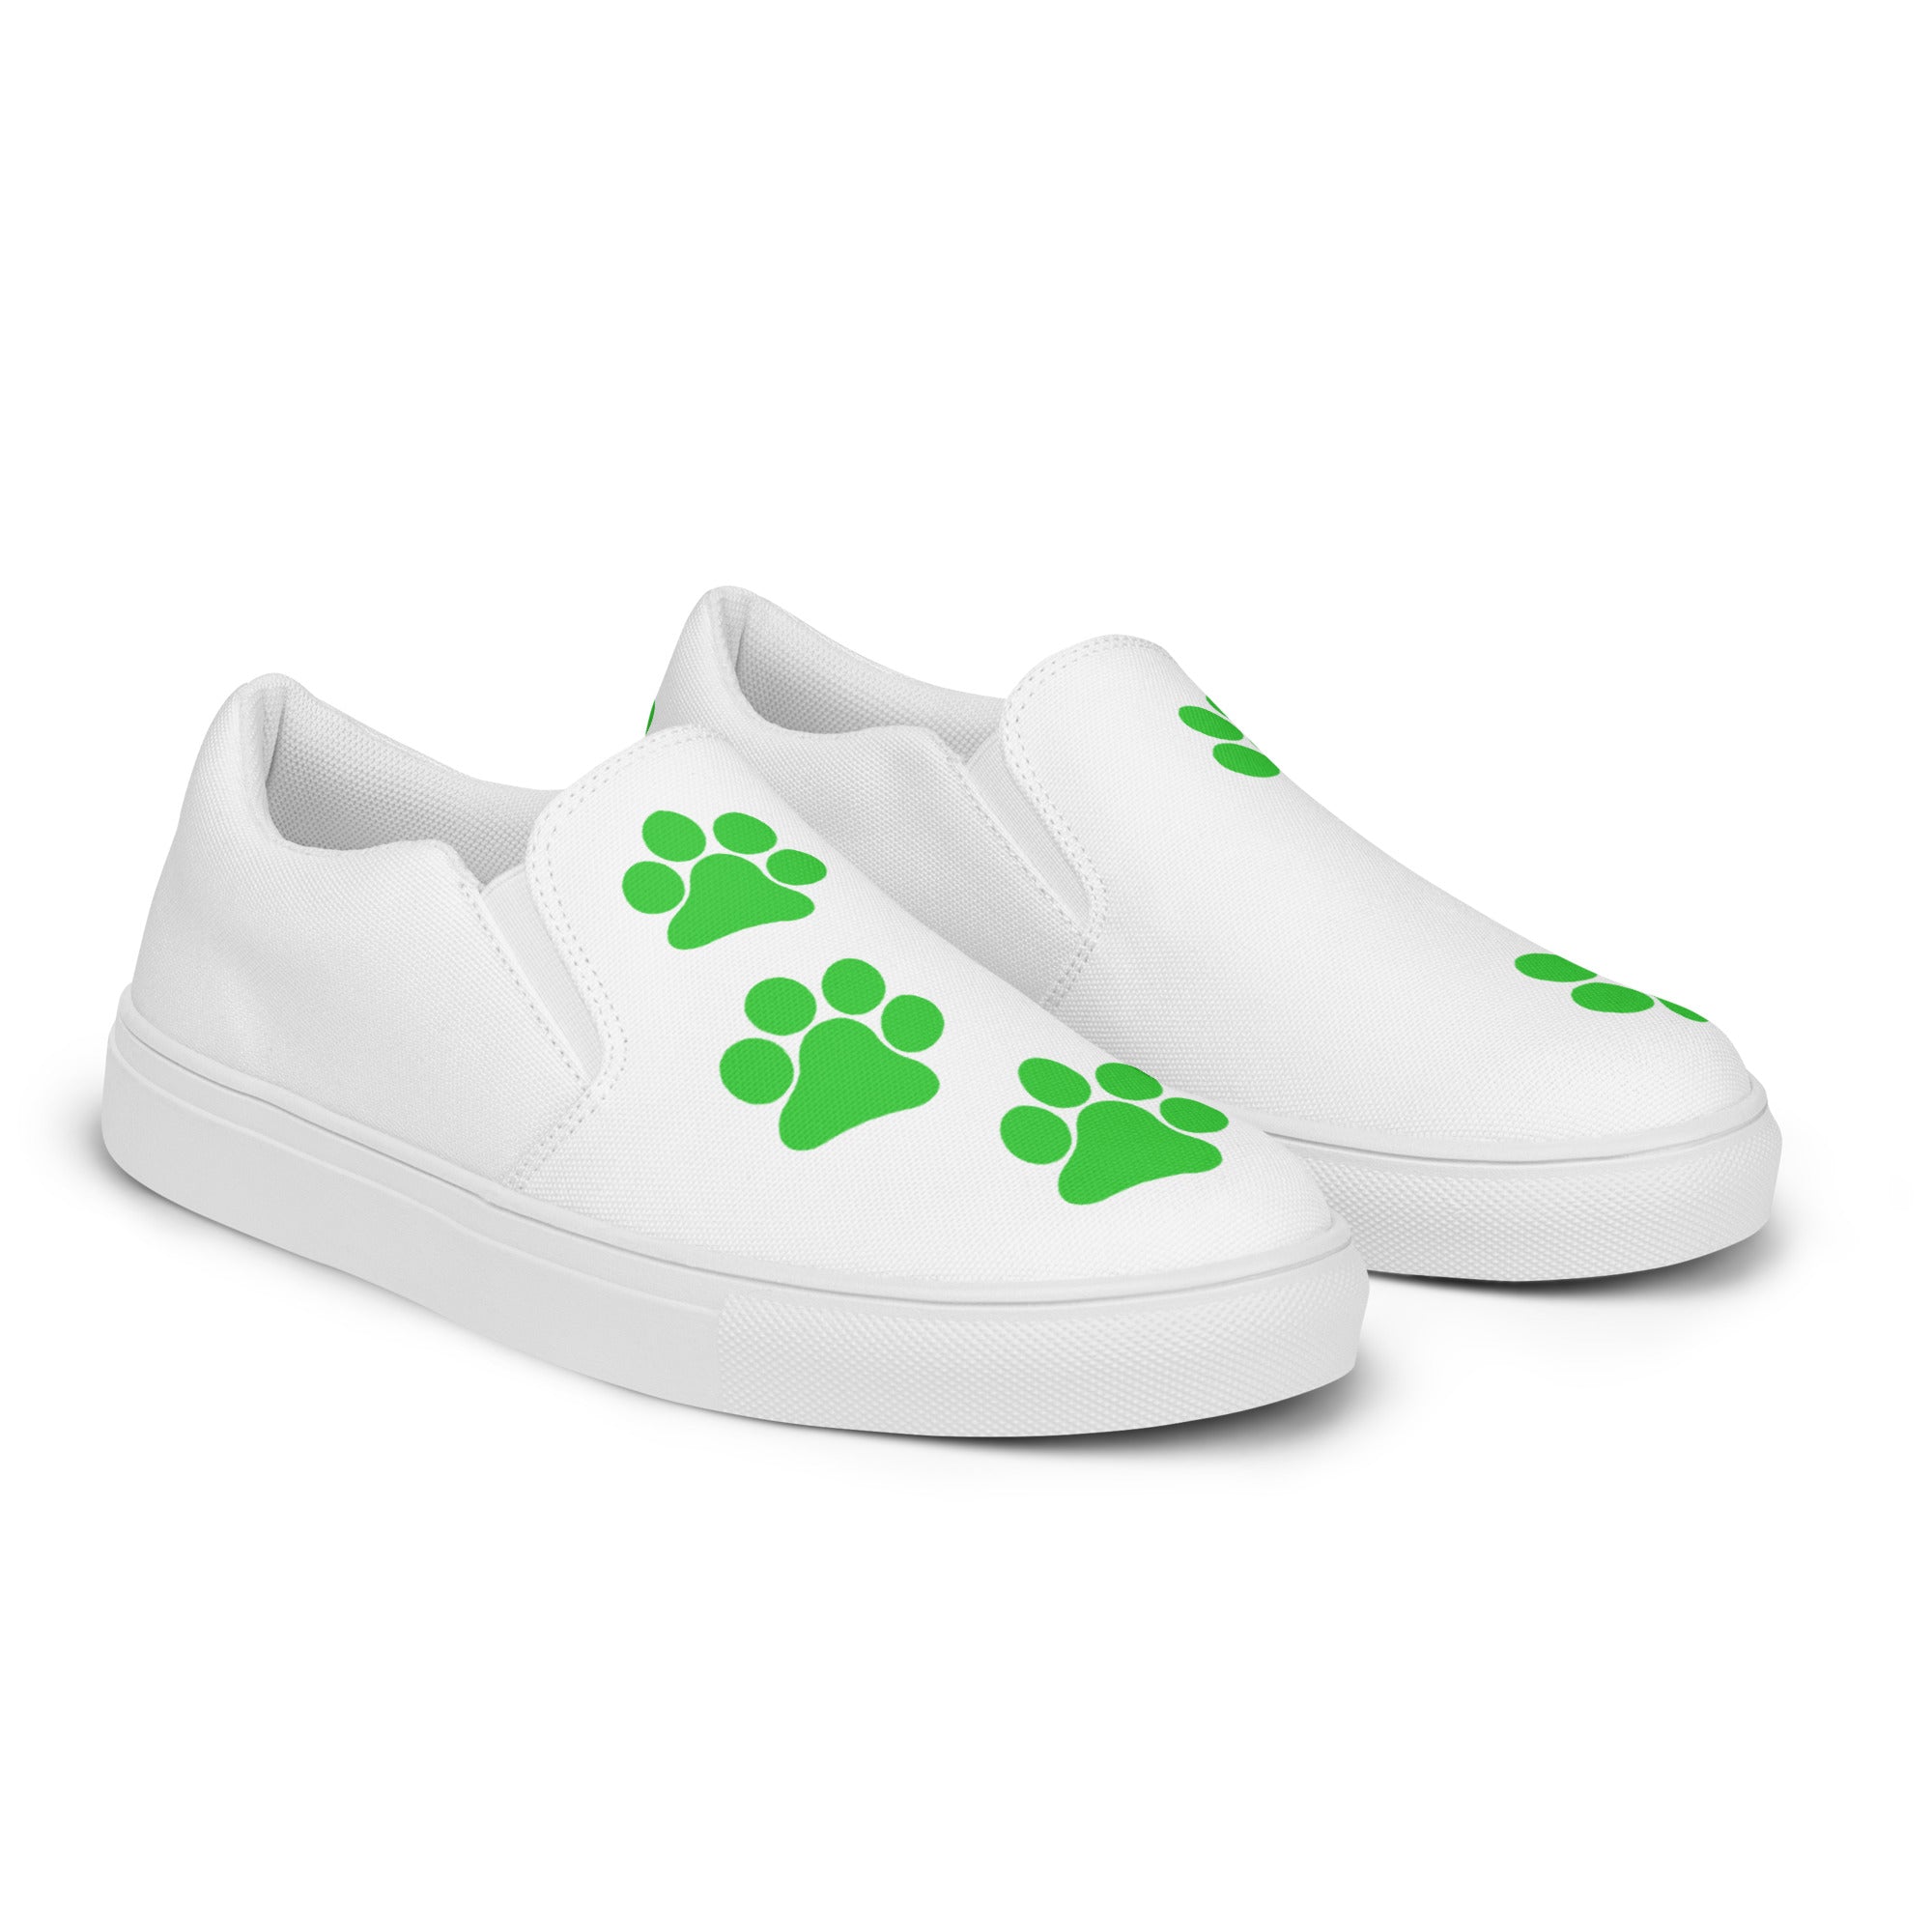 Men’s slip-on Lime Paw shoes